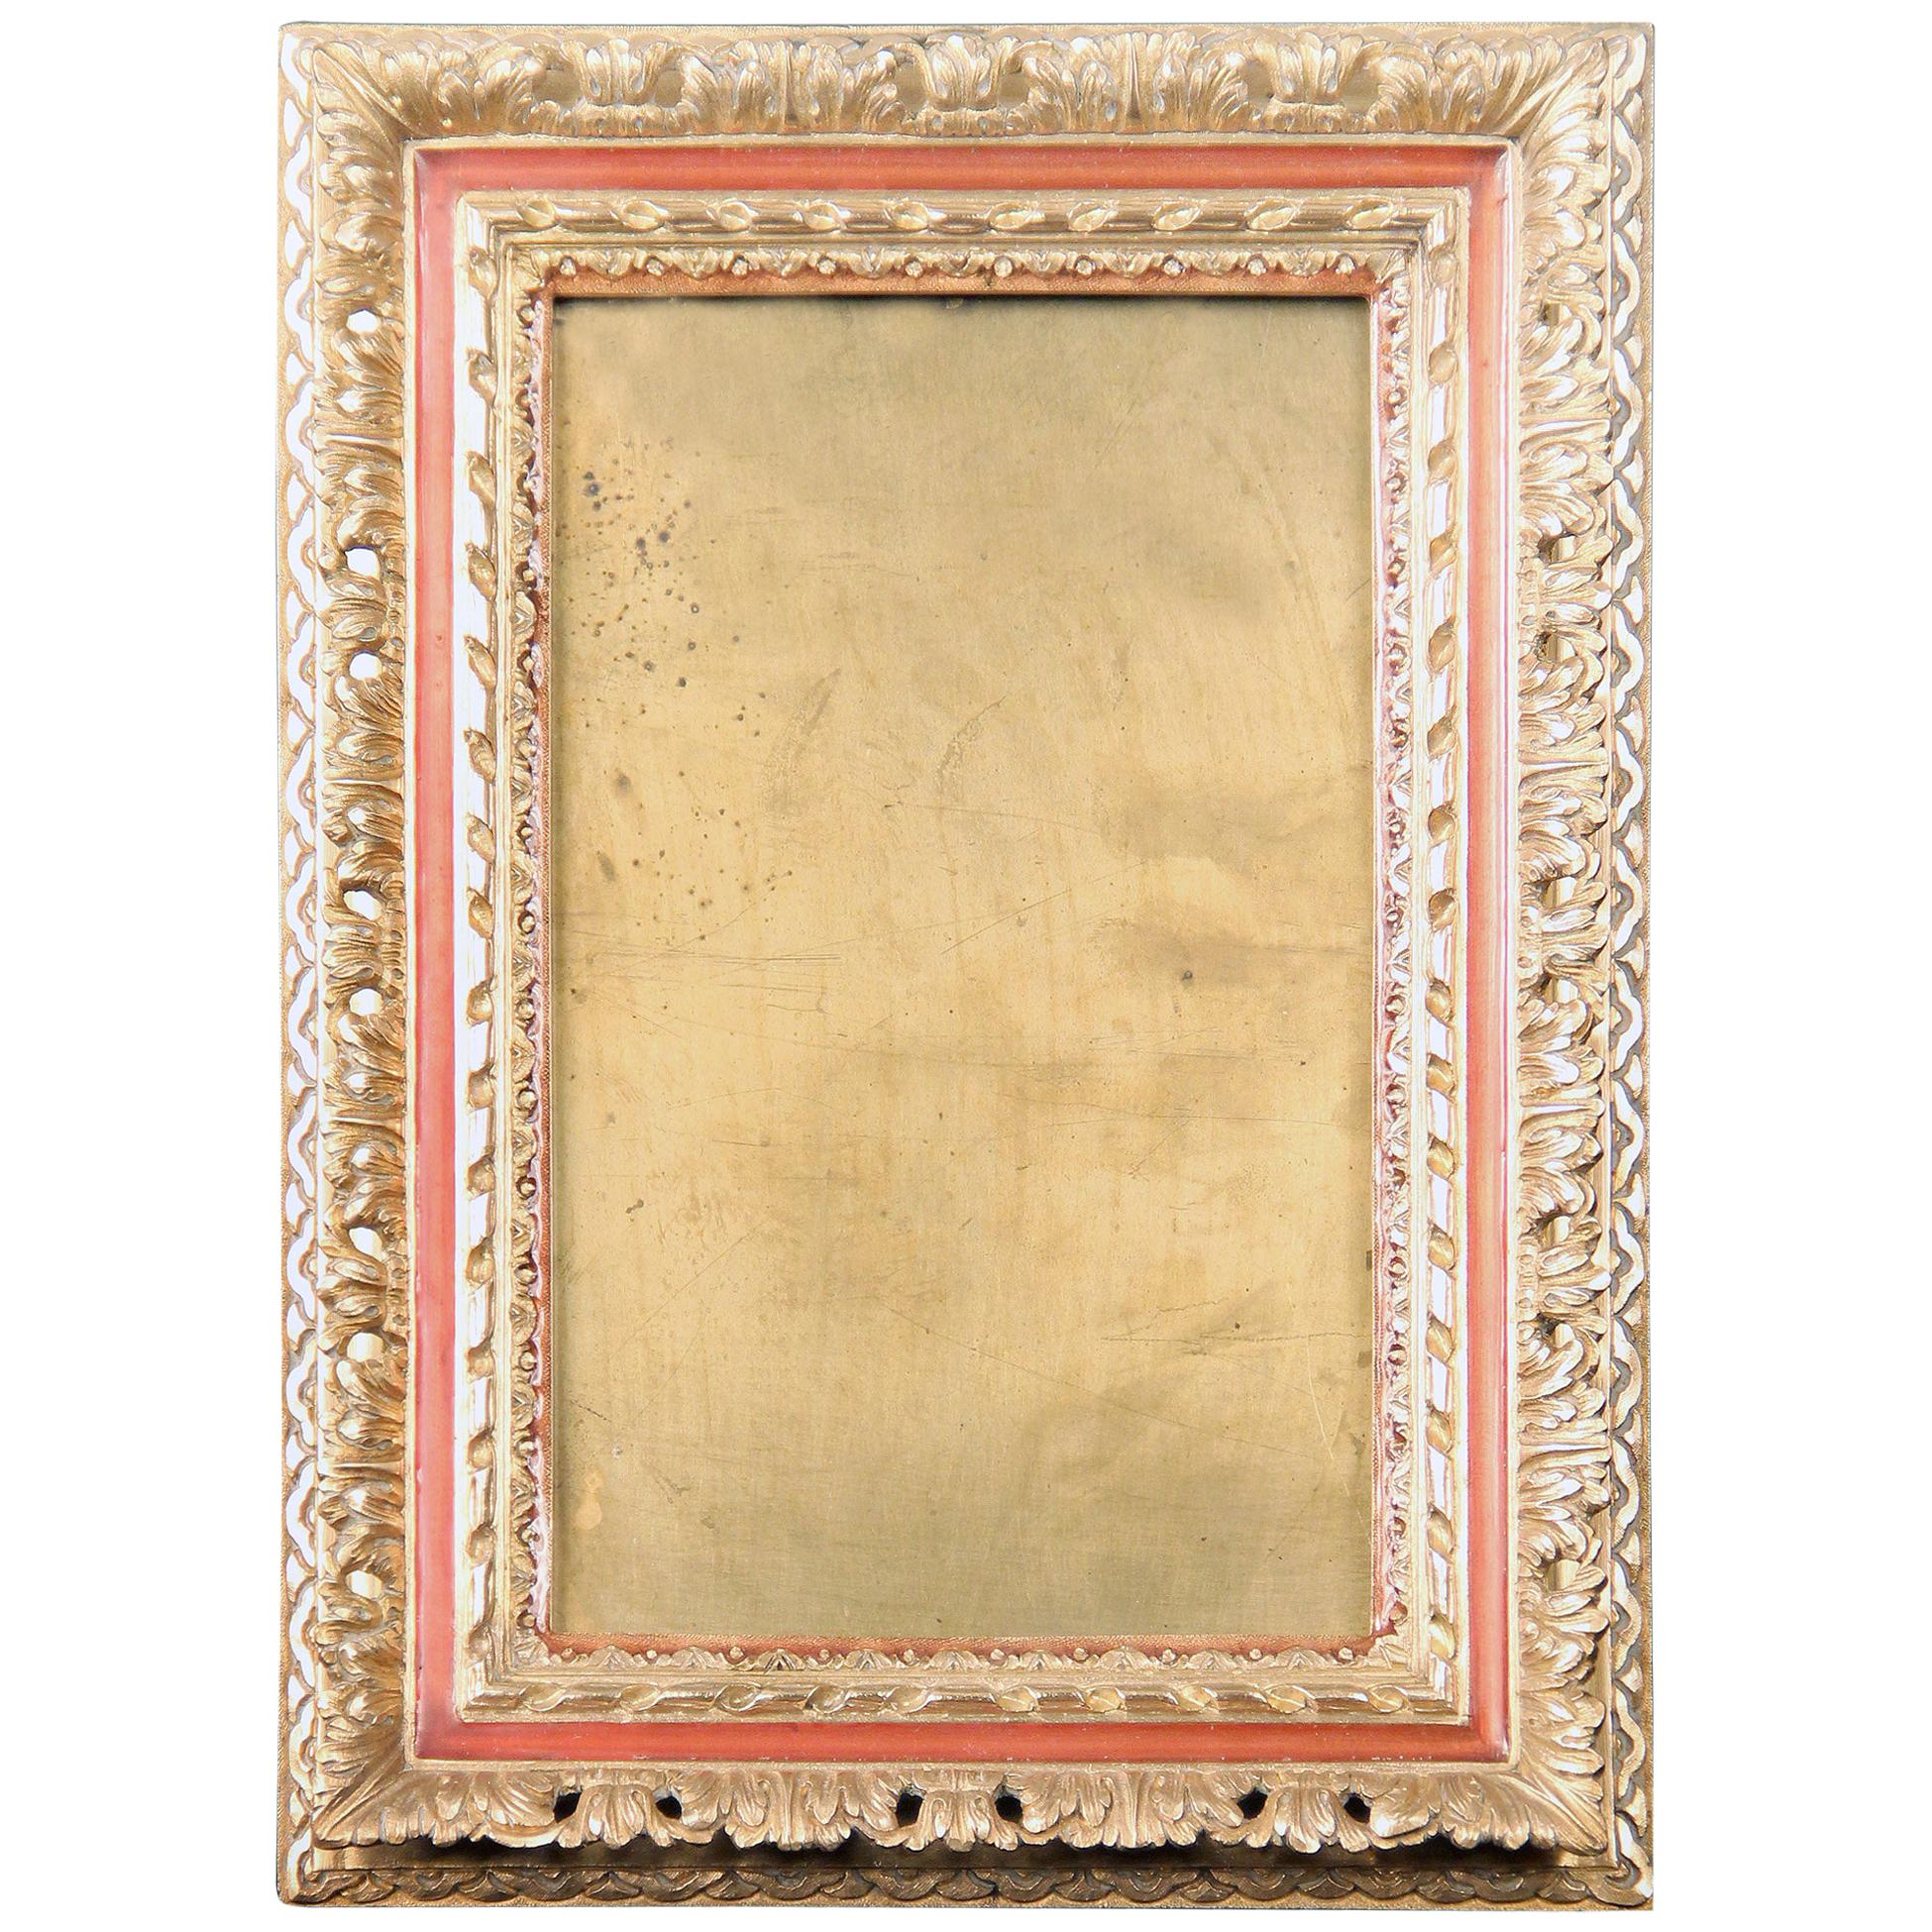 Very Fine Late 19th-Early 20th Century Gilt Bronze Picture Frame, G. Vigneron